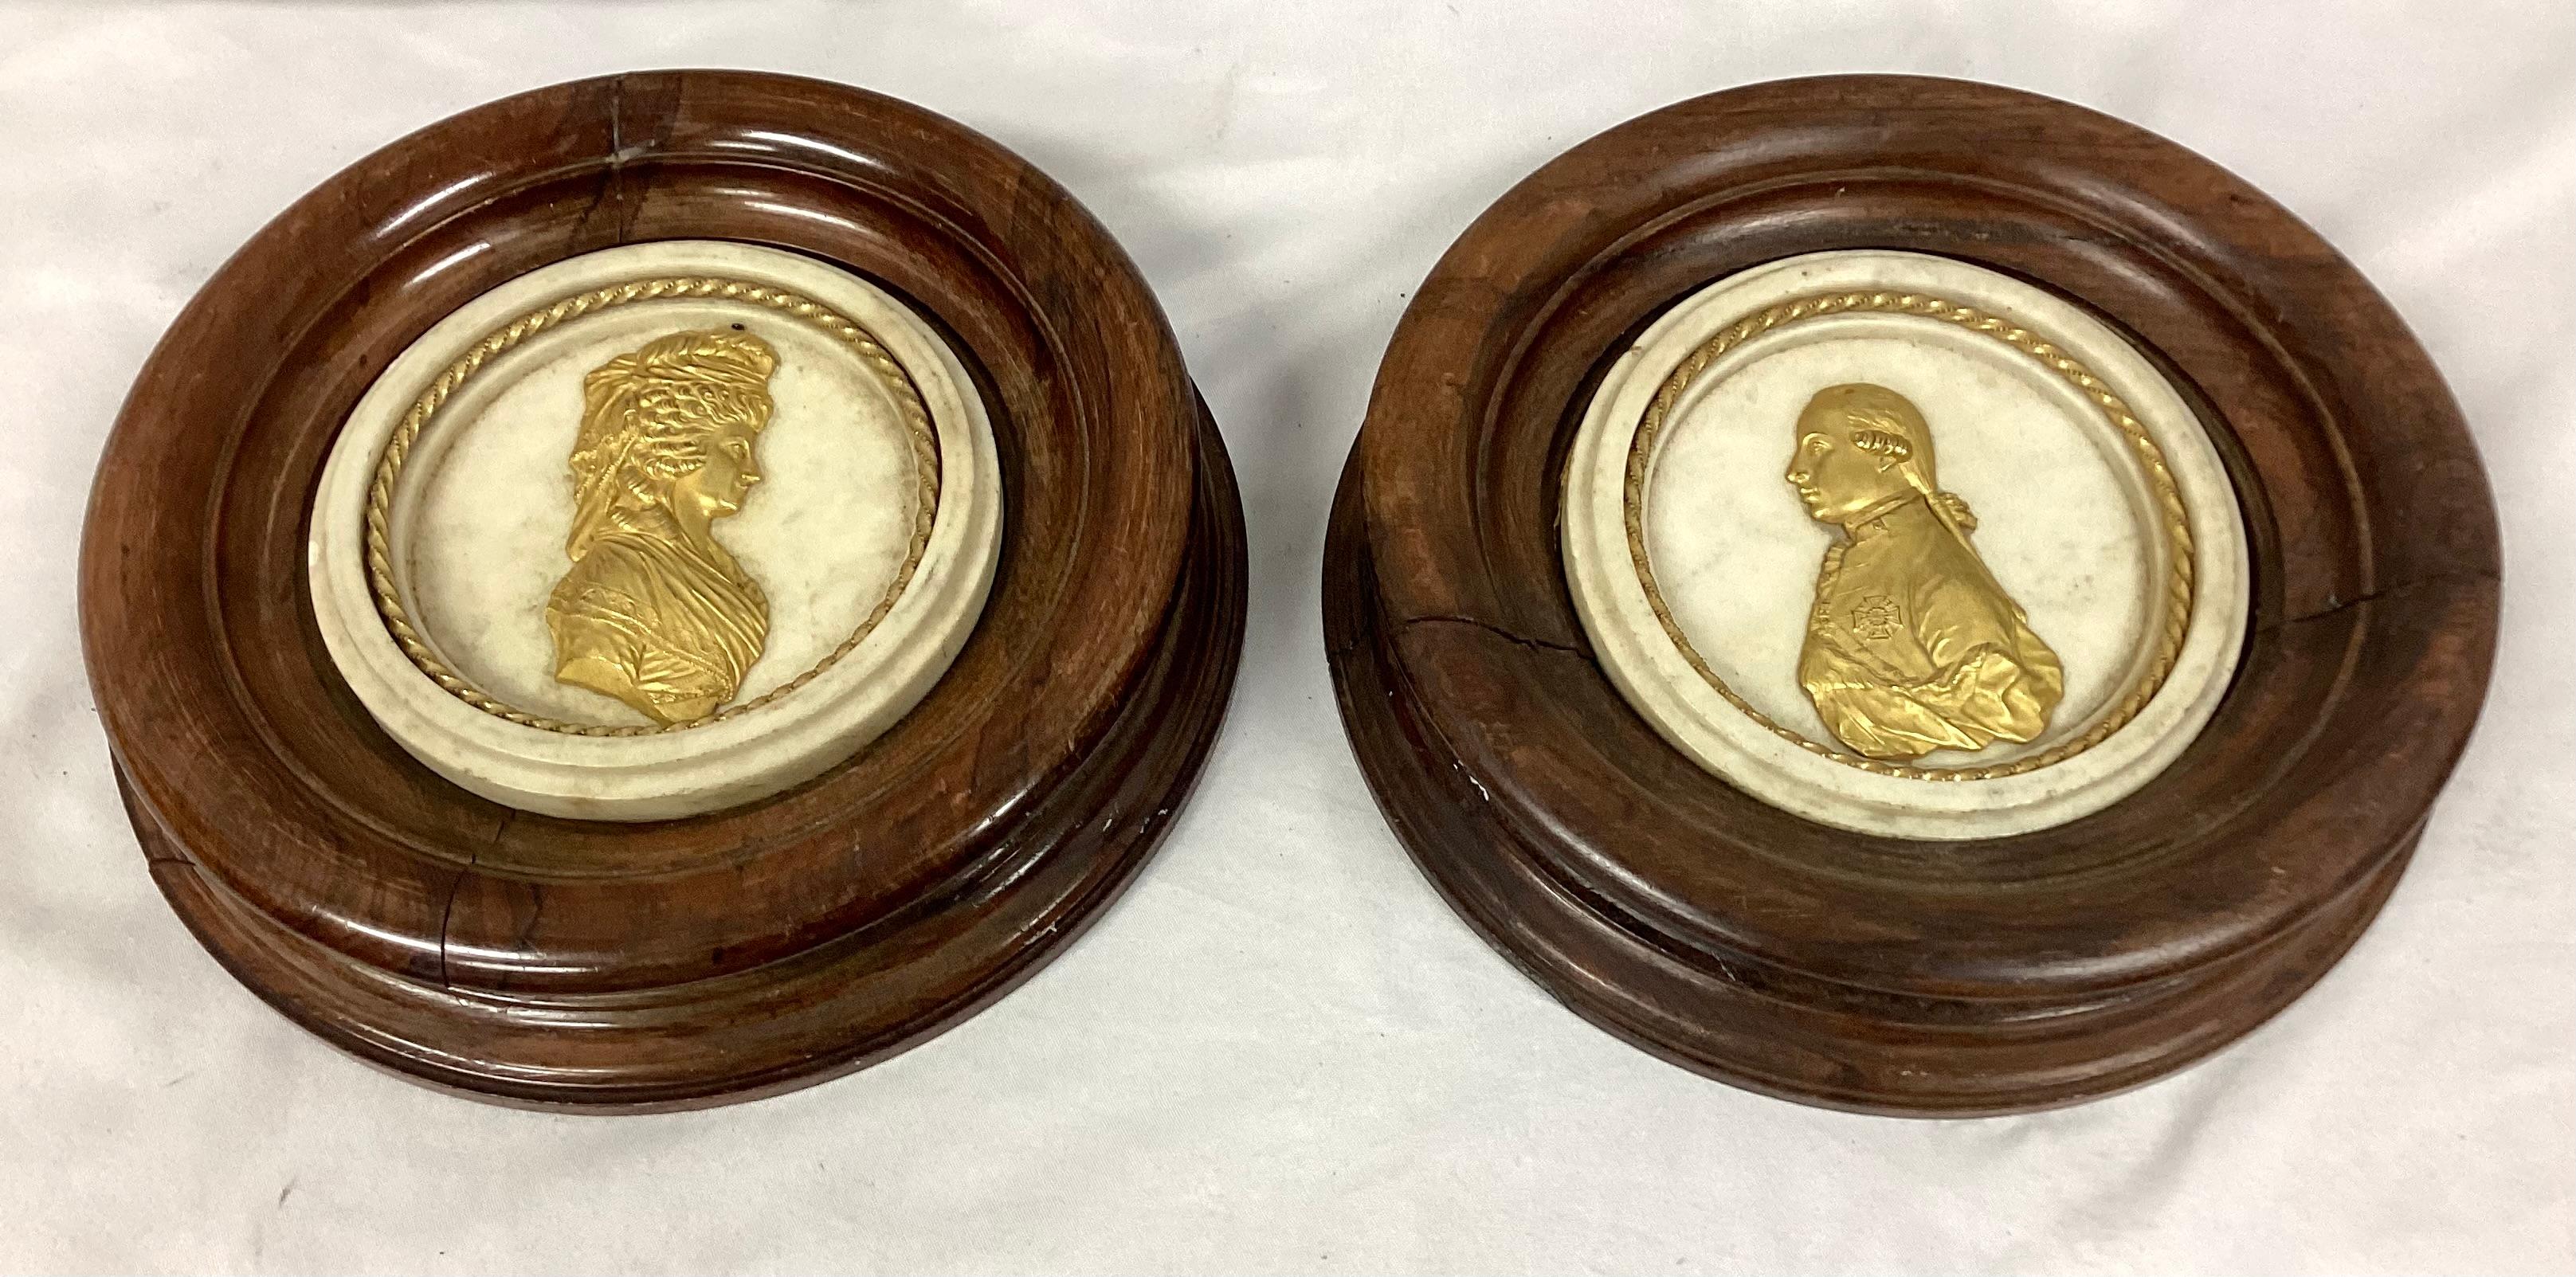 Pair Of 19th Century Doré Bronze Portrait Medallions Mounted on Carrara Marble For Sale 1